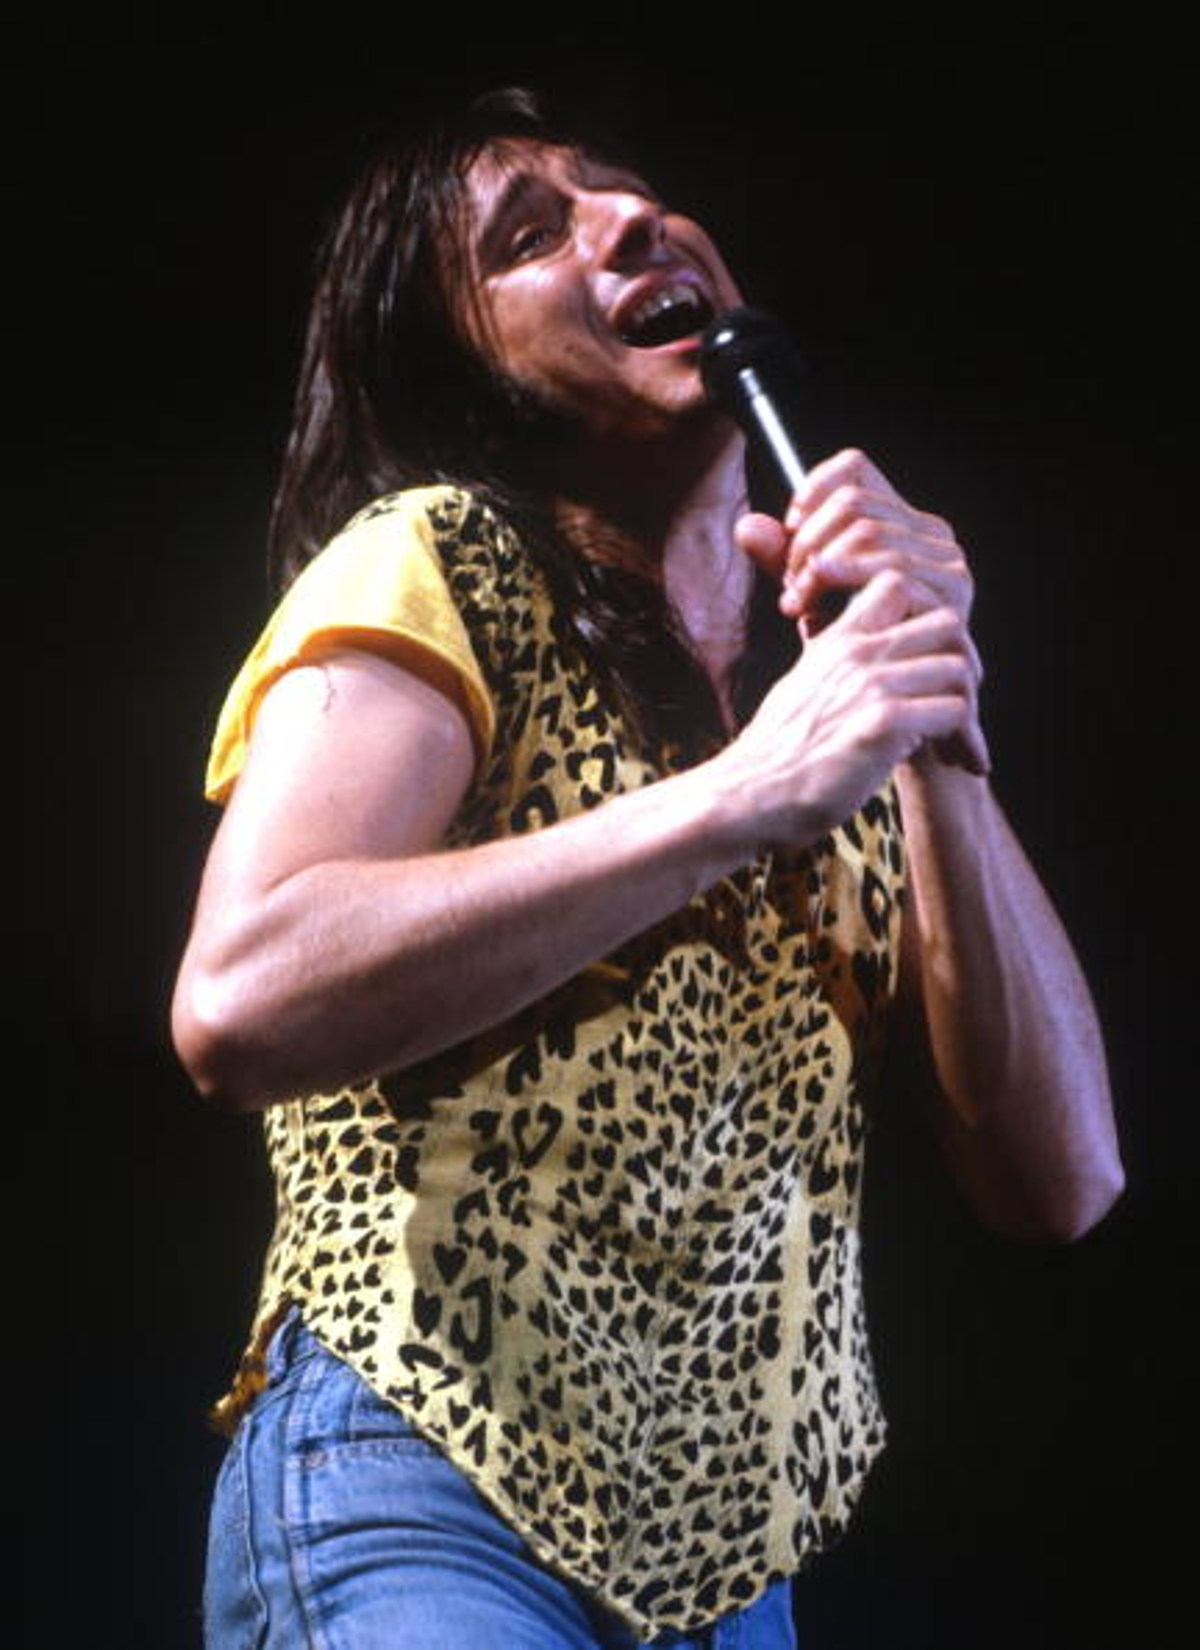 Journey's Steve Perry returns to the stage [VIDEO]